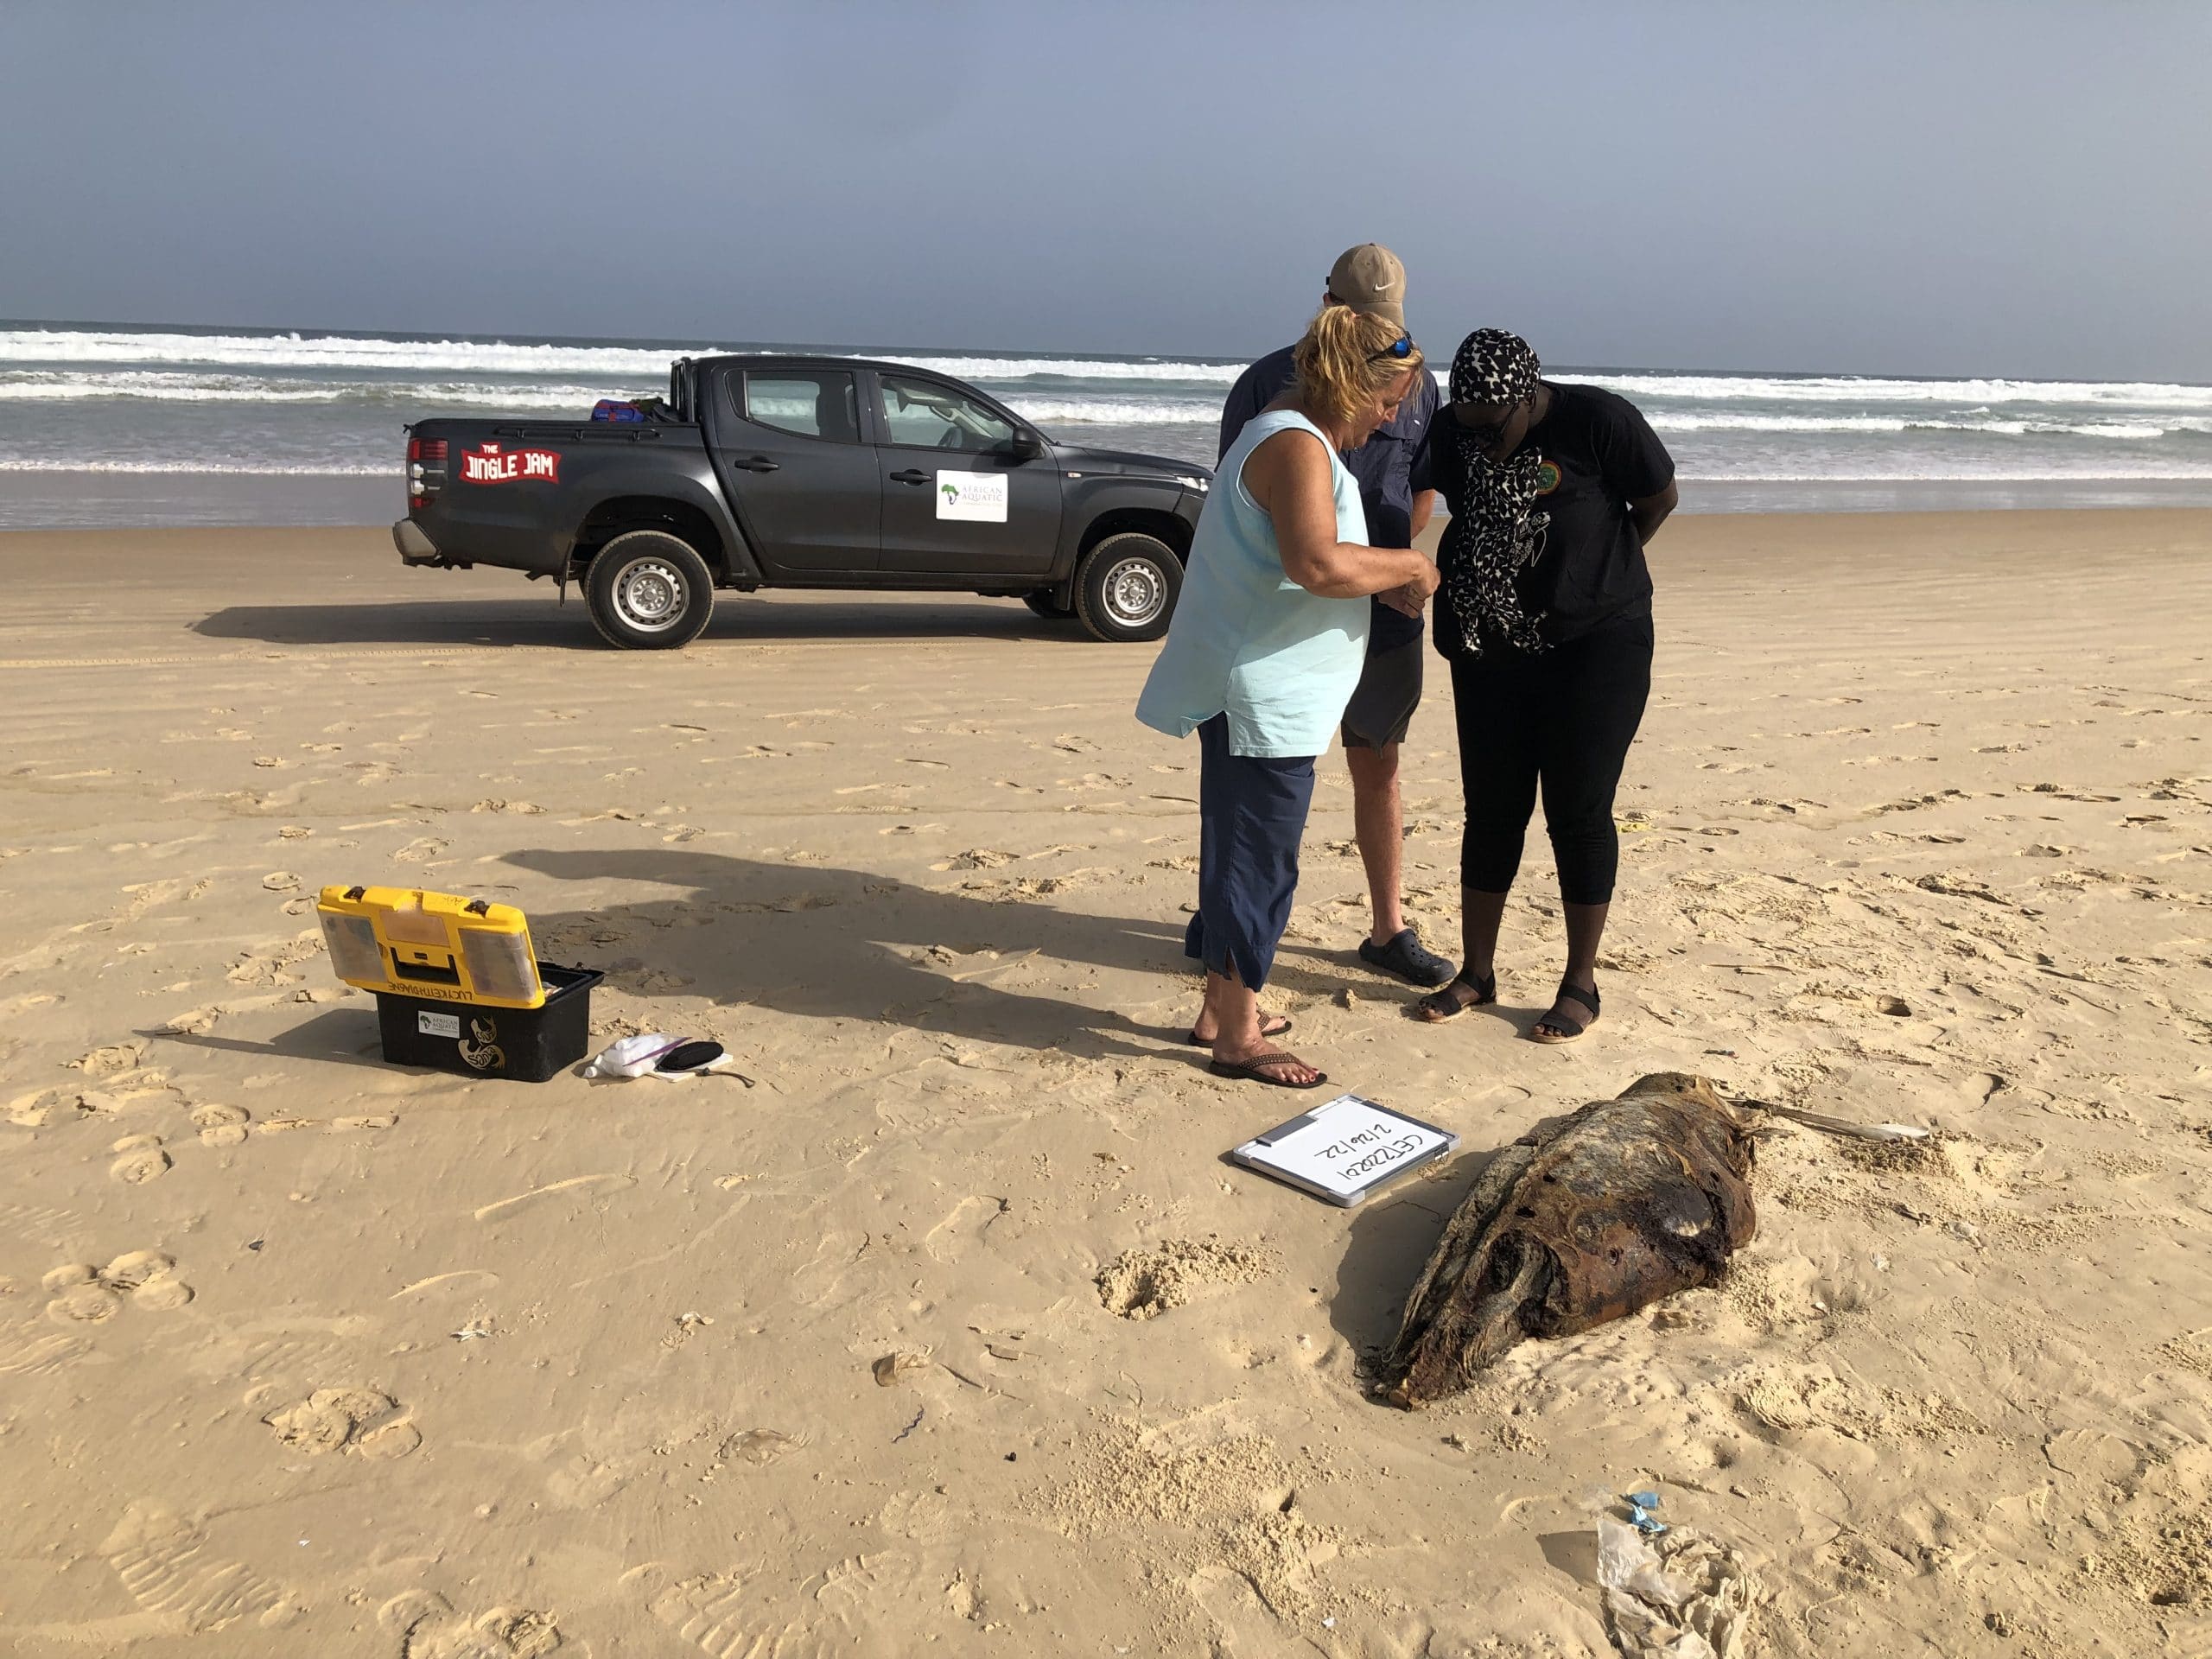 The Senegal beach survey team in action. Photo by AACF